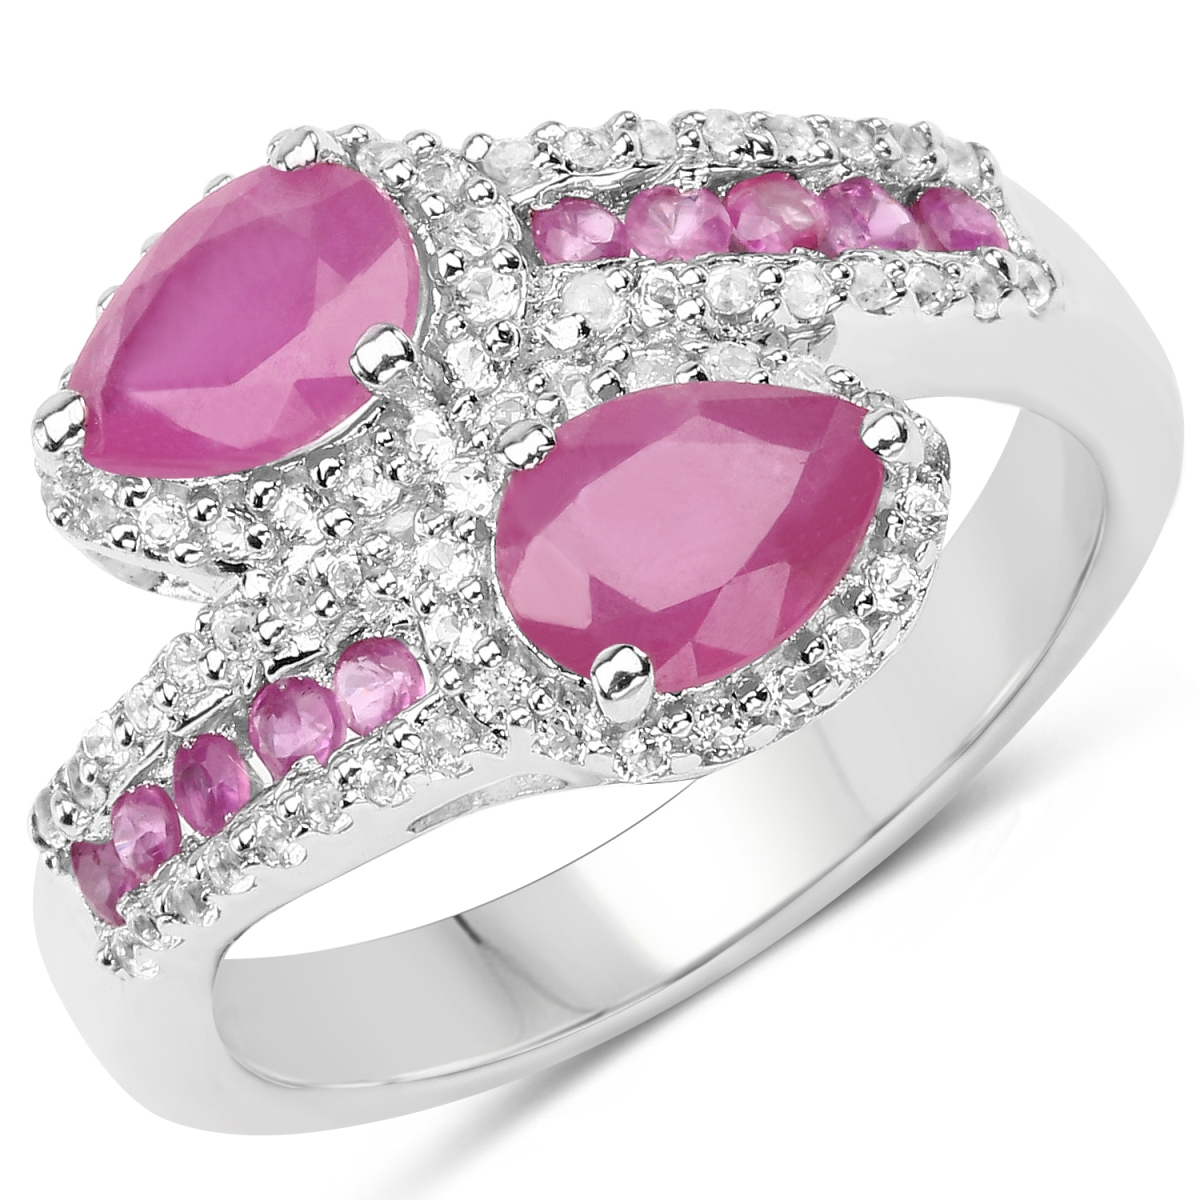 Picture of Malaika QR15814GFRRWT-SSR-9 2.43 Carat Glass Filled Ruby & White Topaz Sterling Silver Ring